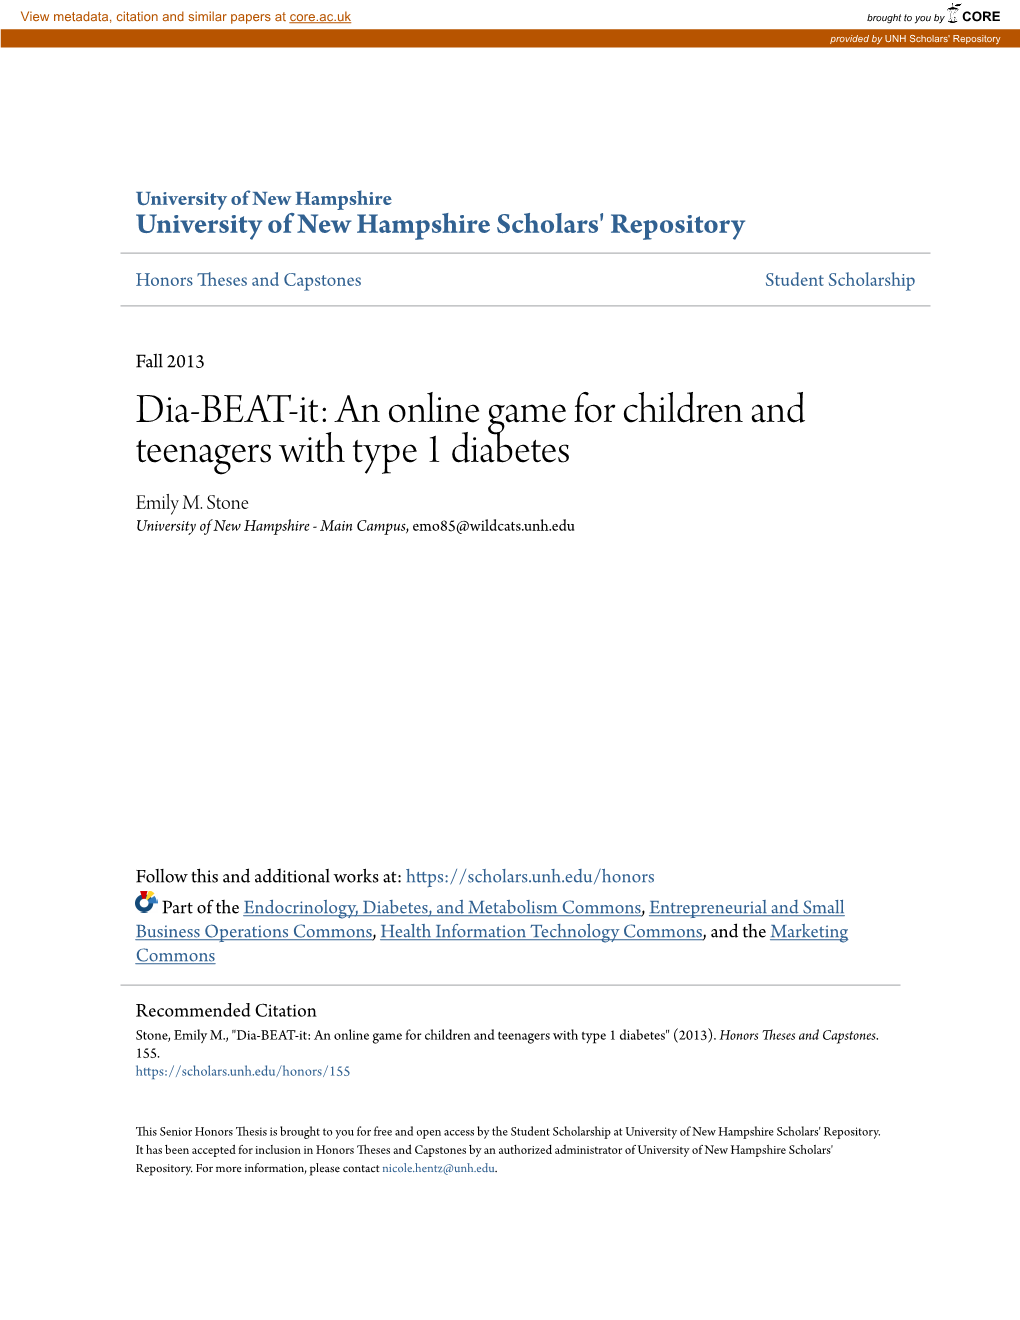 Dia-BEAT-It: an Online Game for Children and Teenagers with Type 1 Diabetes Emily M